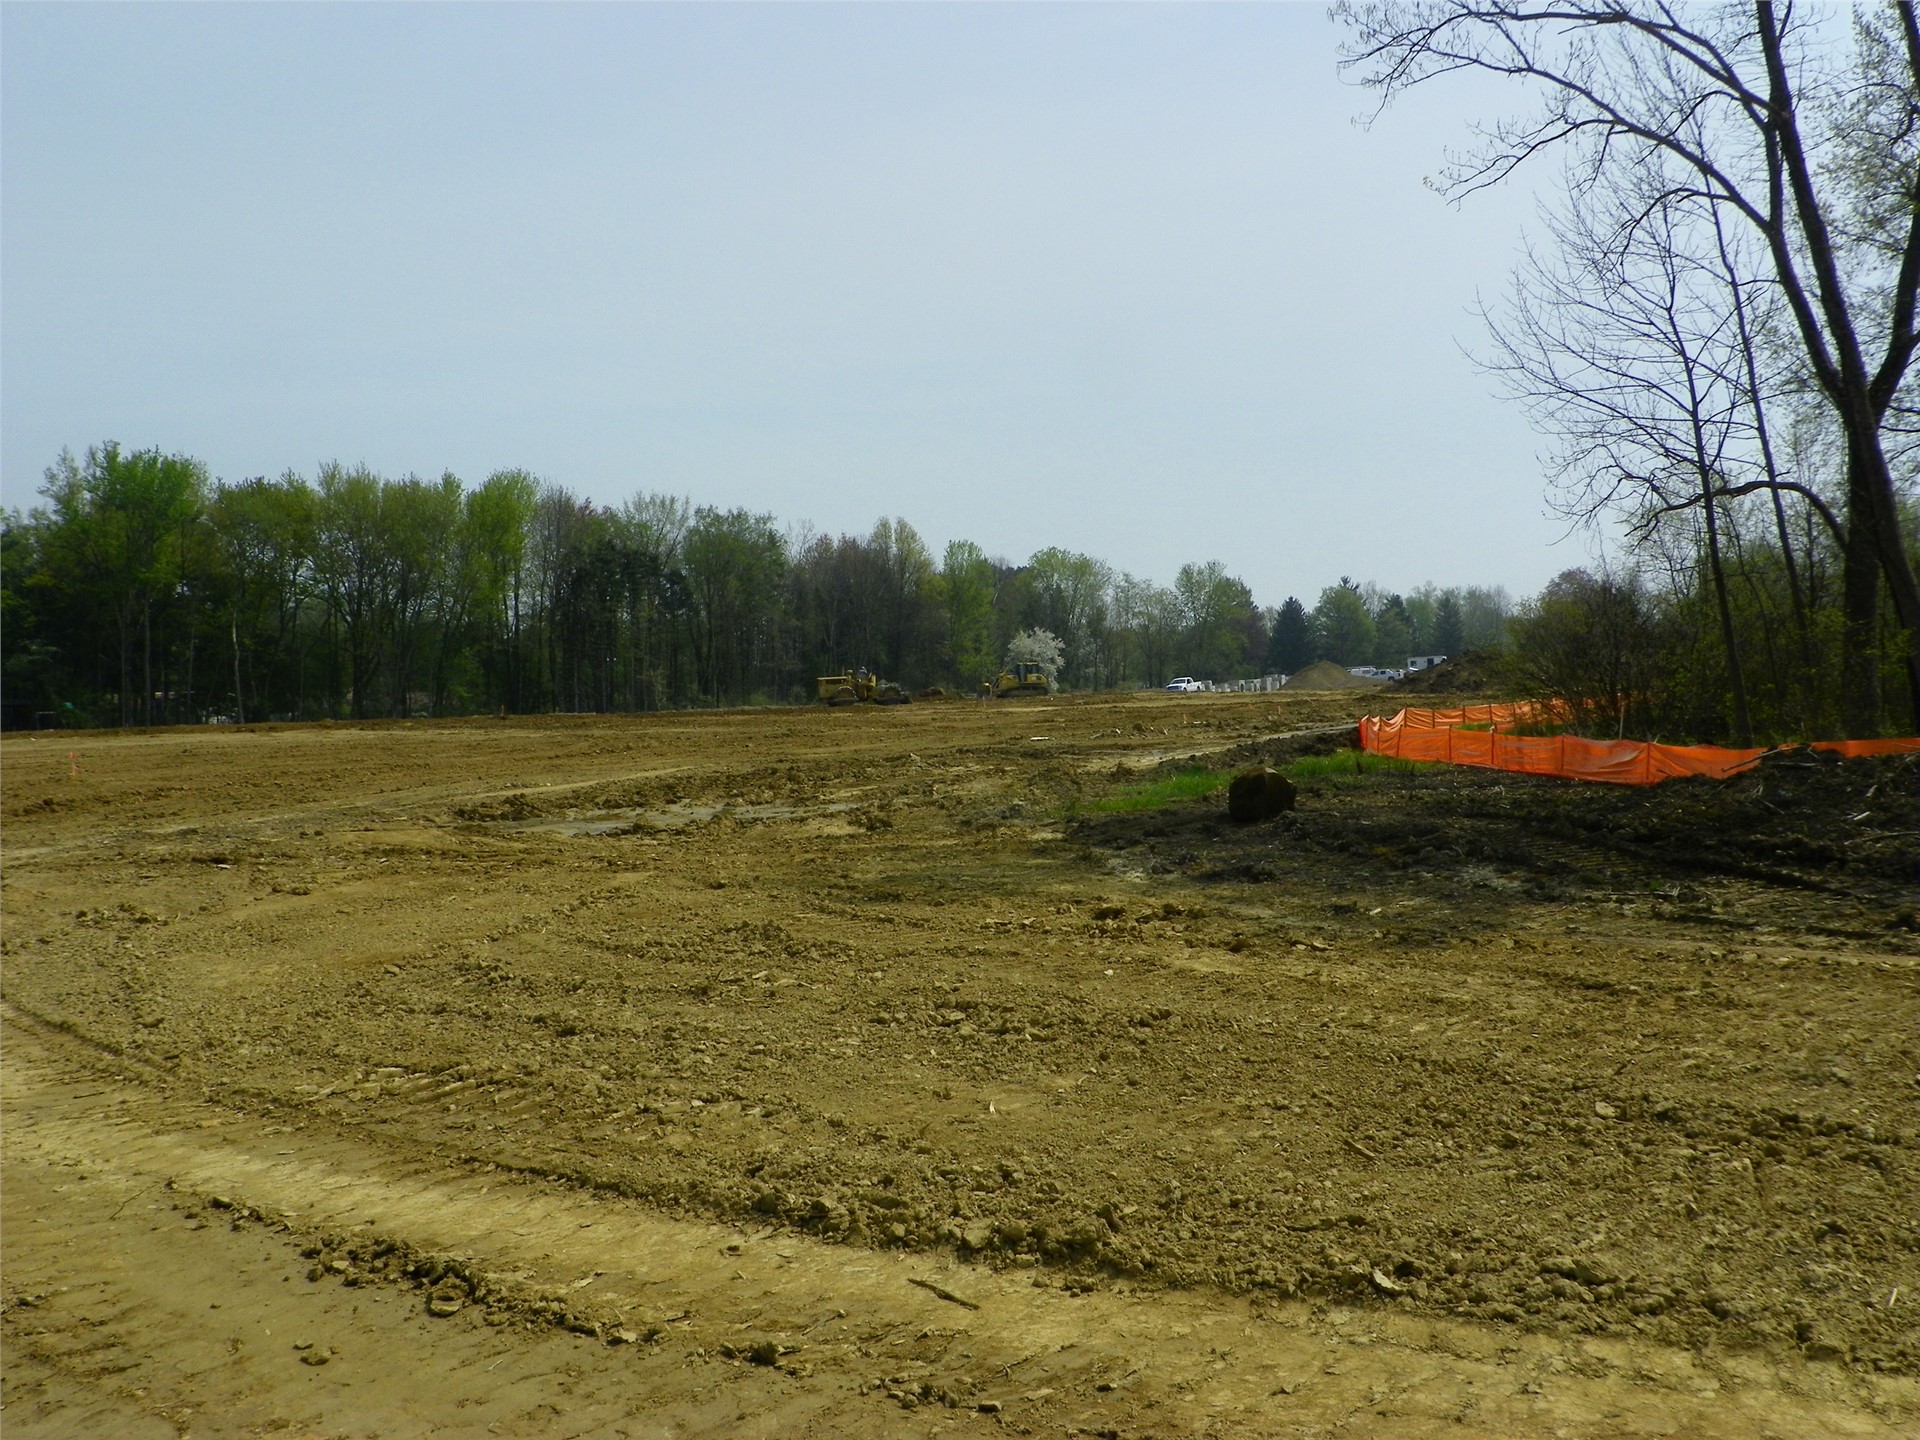 Another view of Site of Arts wing (tractors near staff parking lot) (Northeast corner of property)